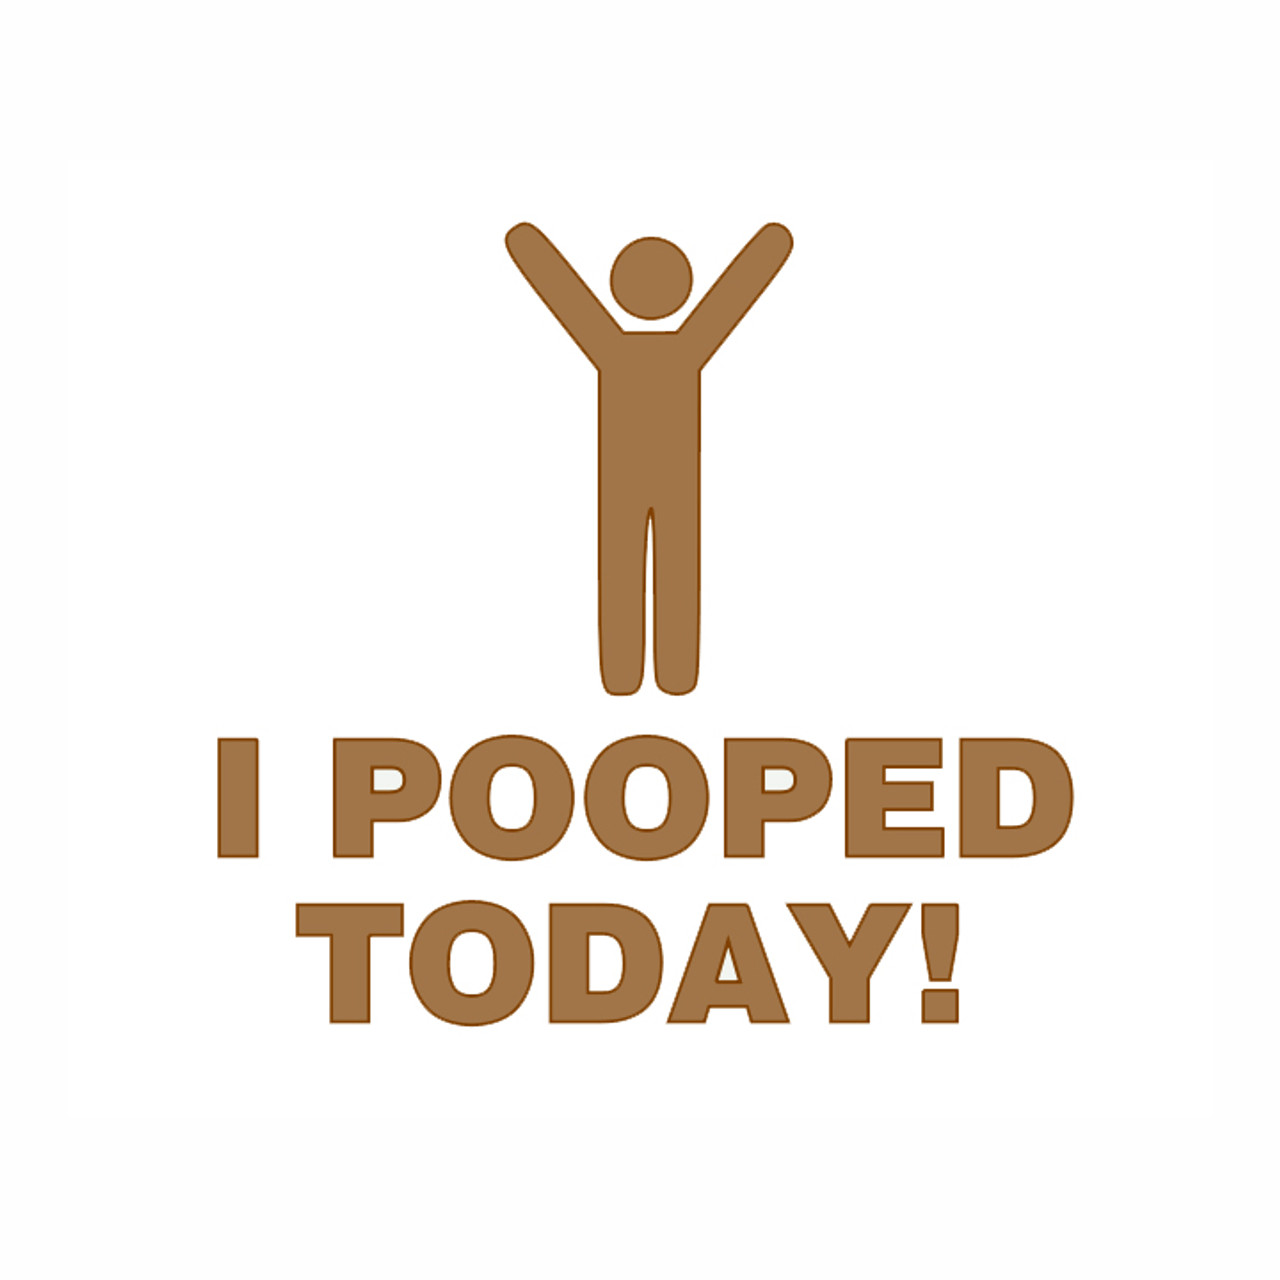 I Pooped Today! Vinyl Decal - Die Cut Sticker